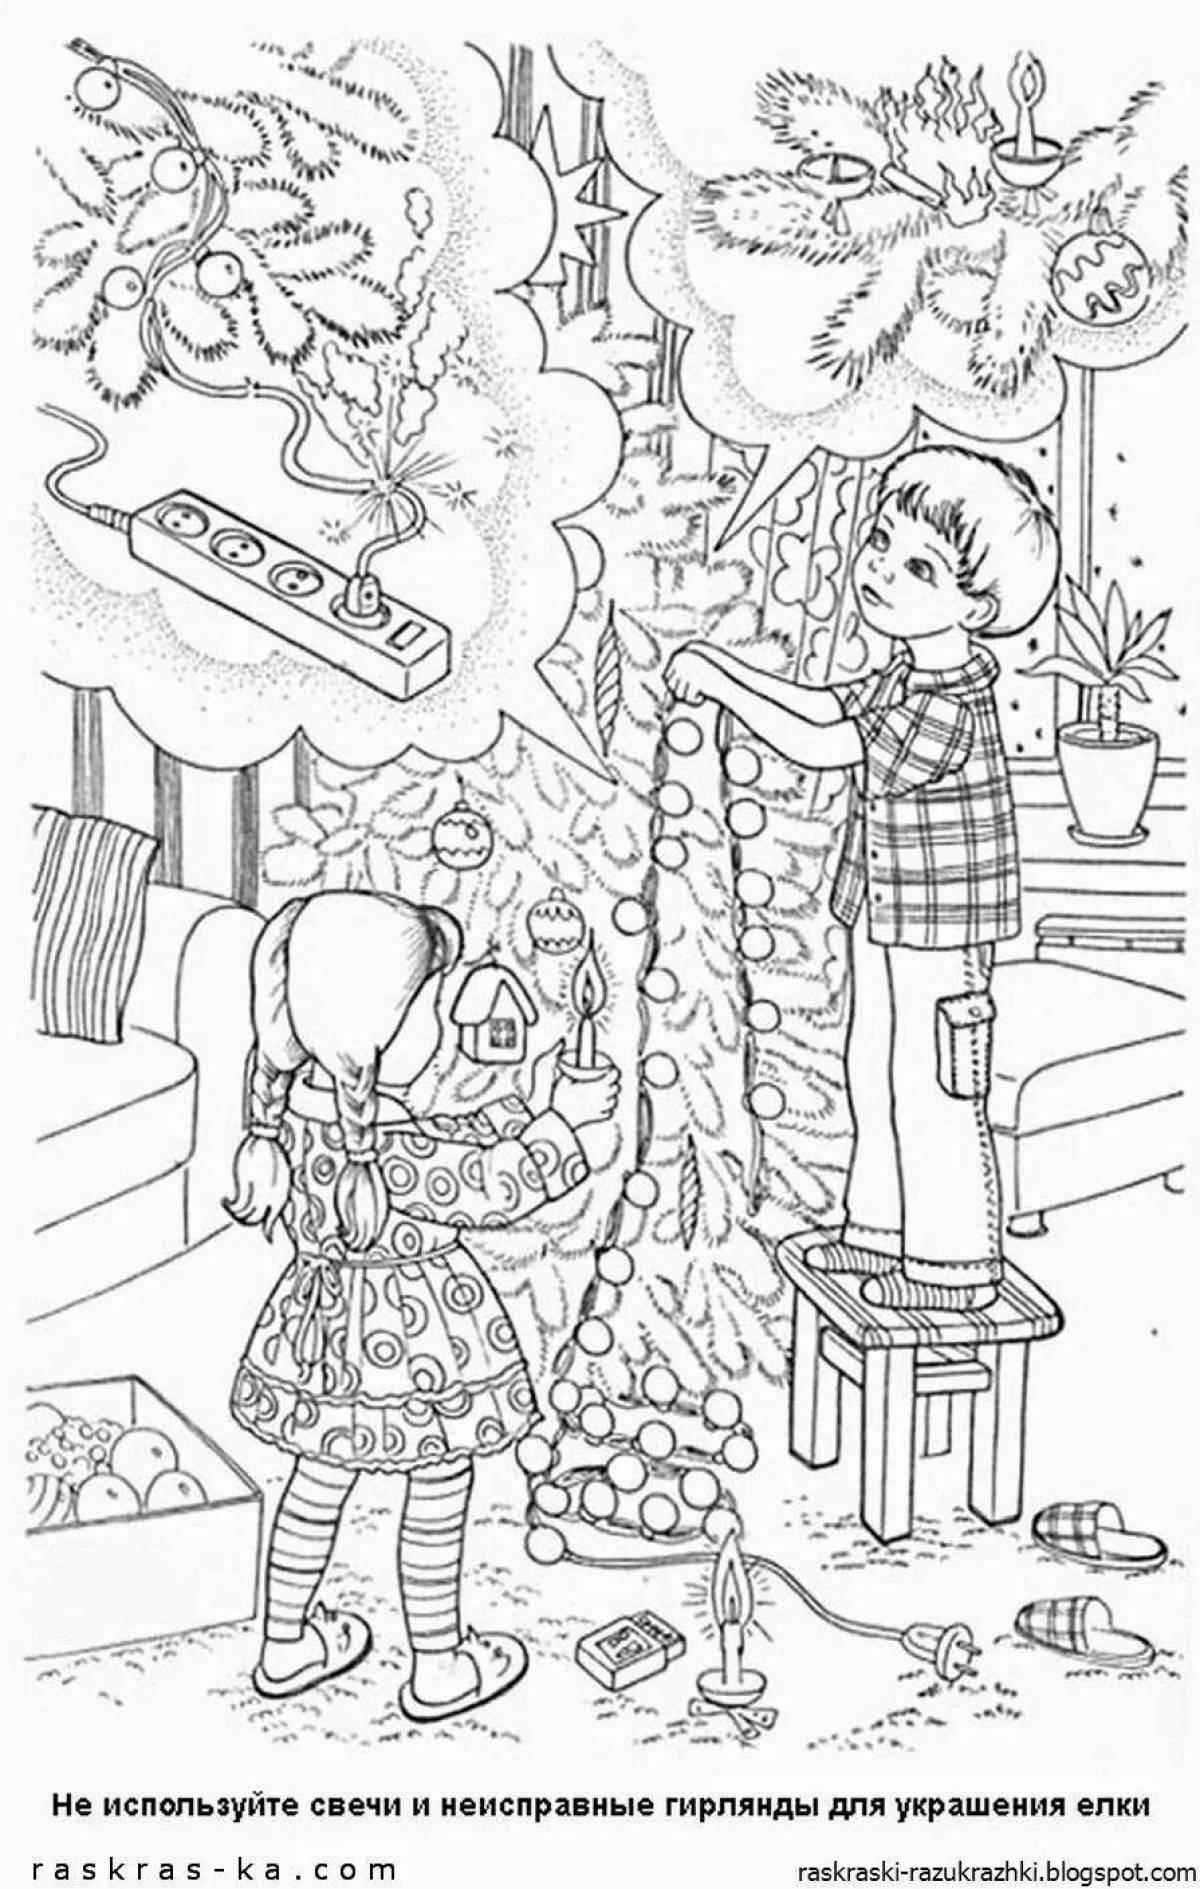 Fun fire causes coloring page for kids